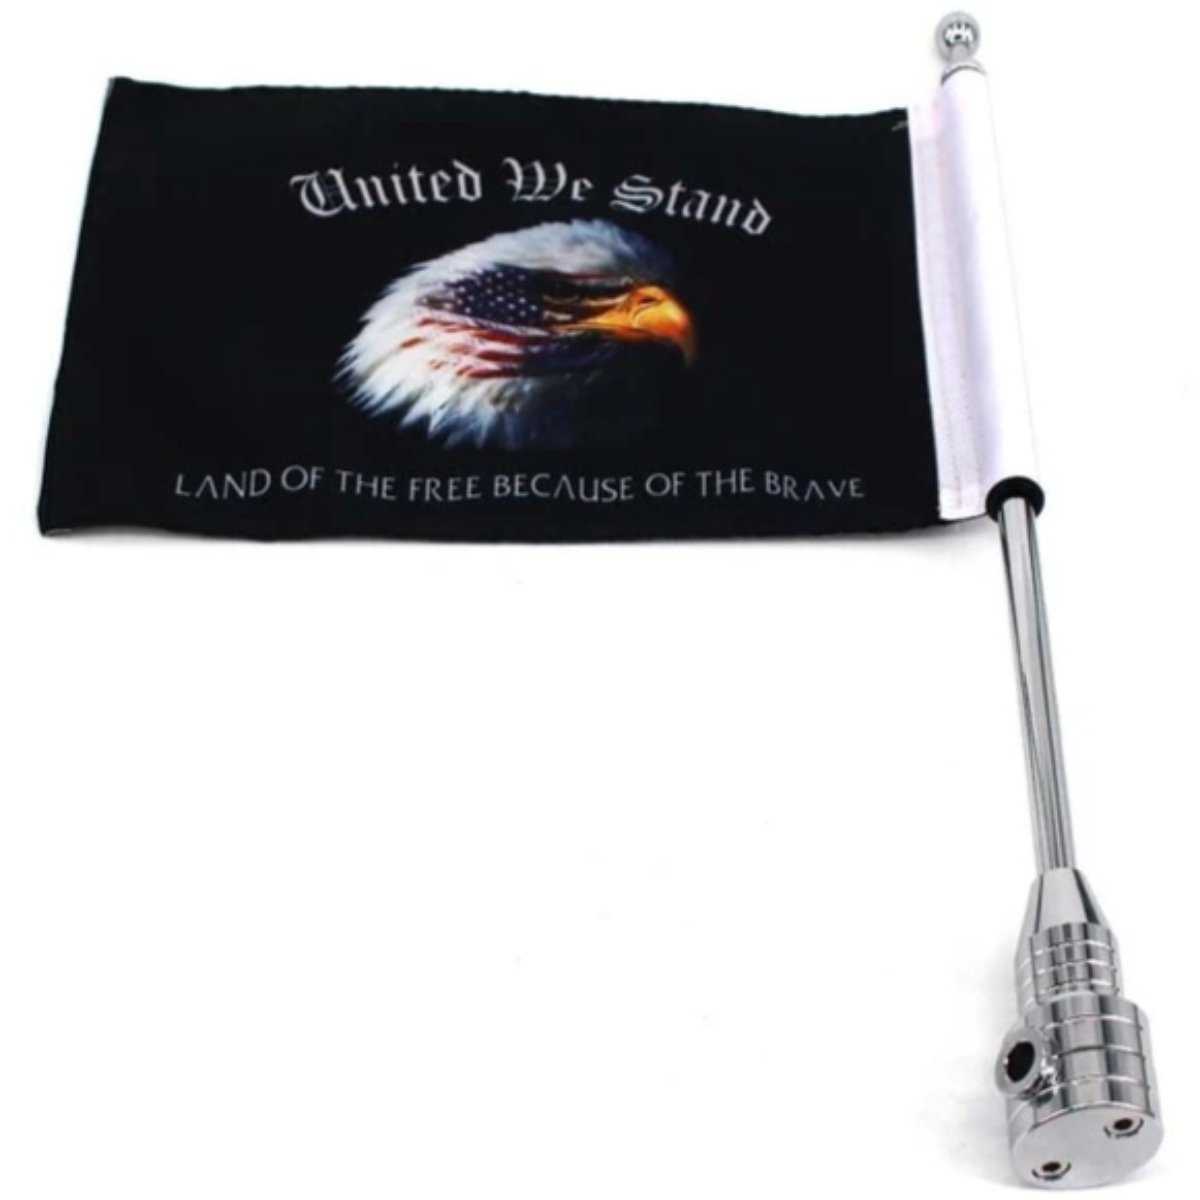 United We Stand Motorcycle Flag Pole Mount